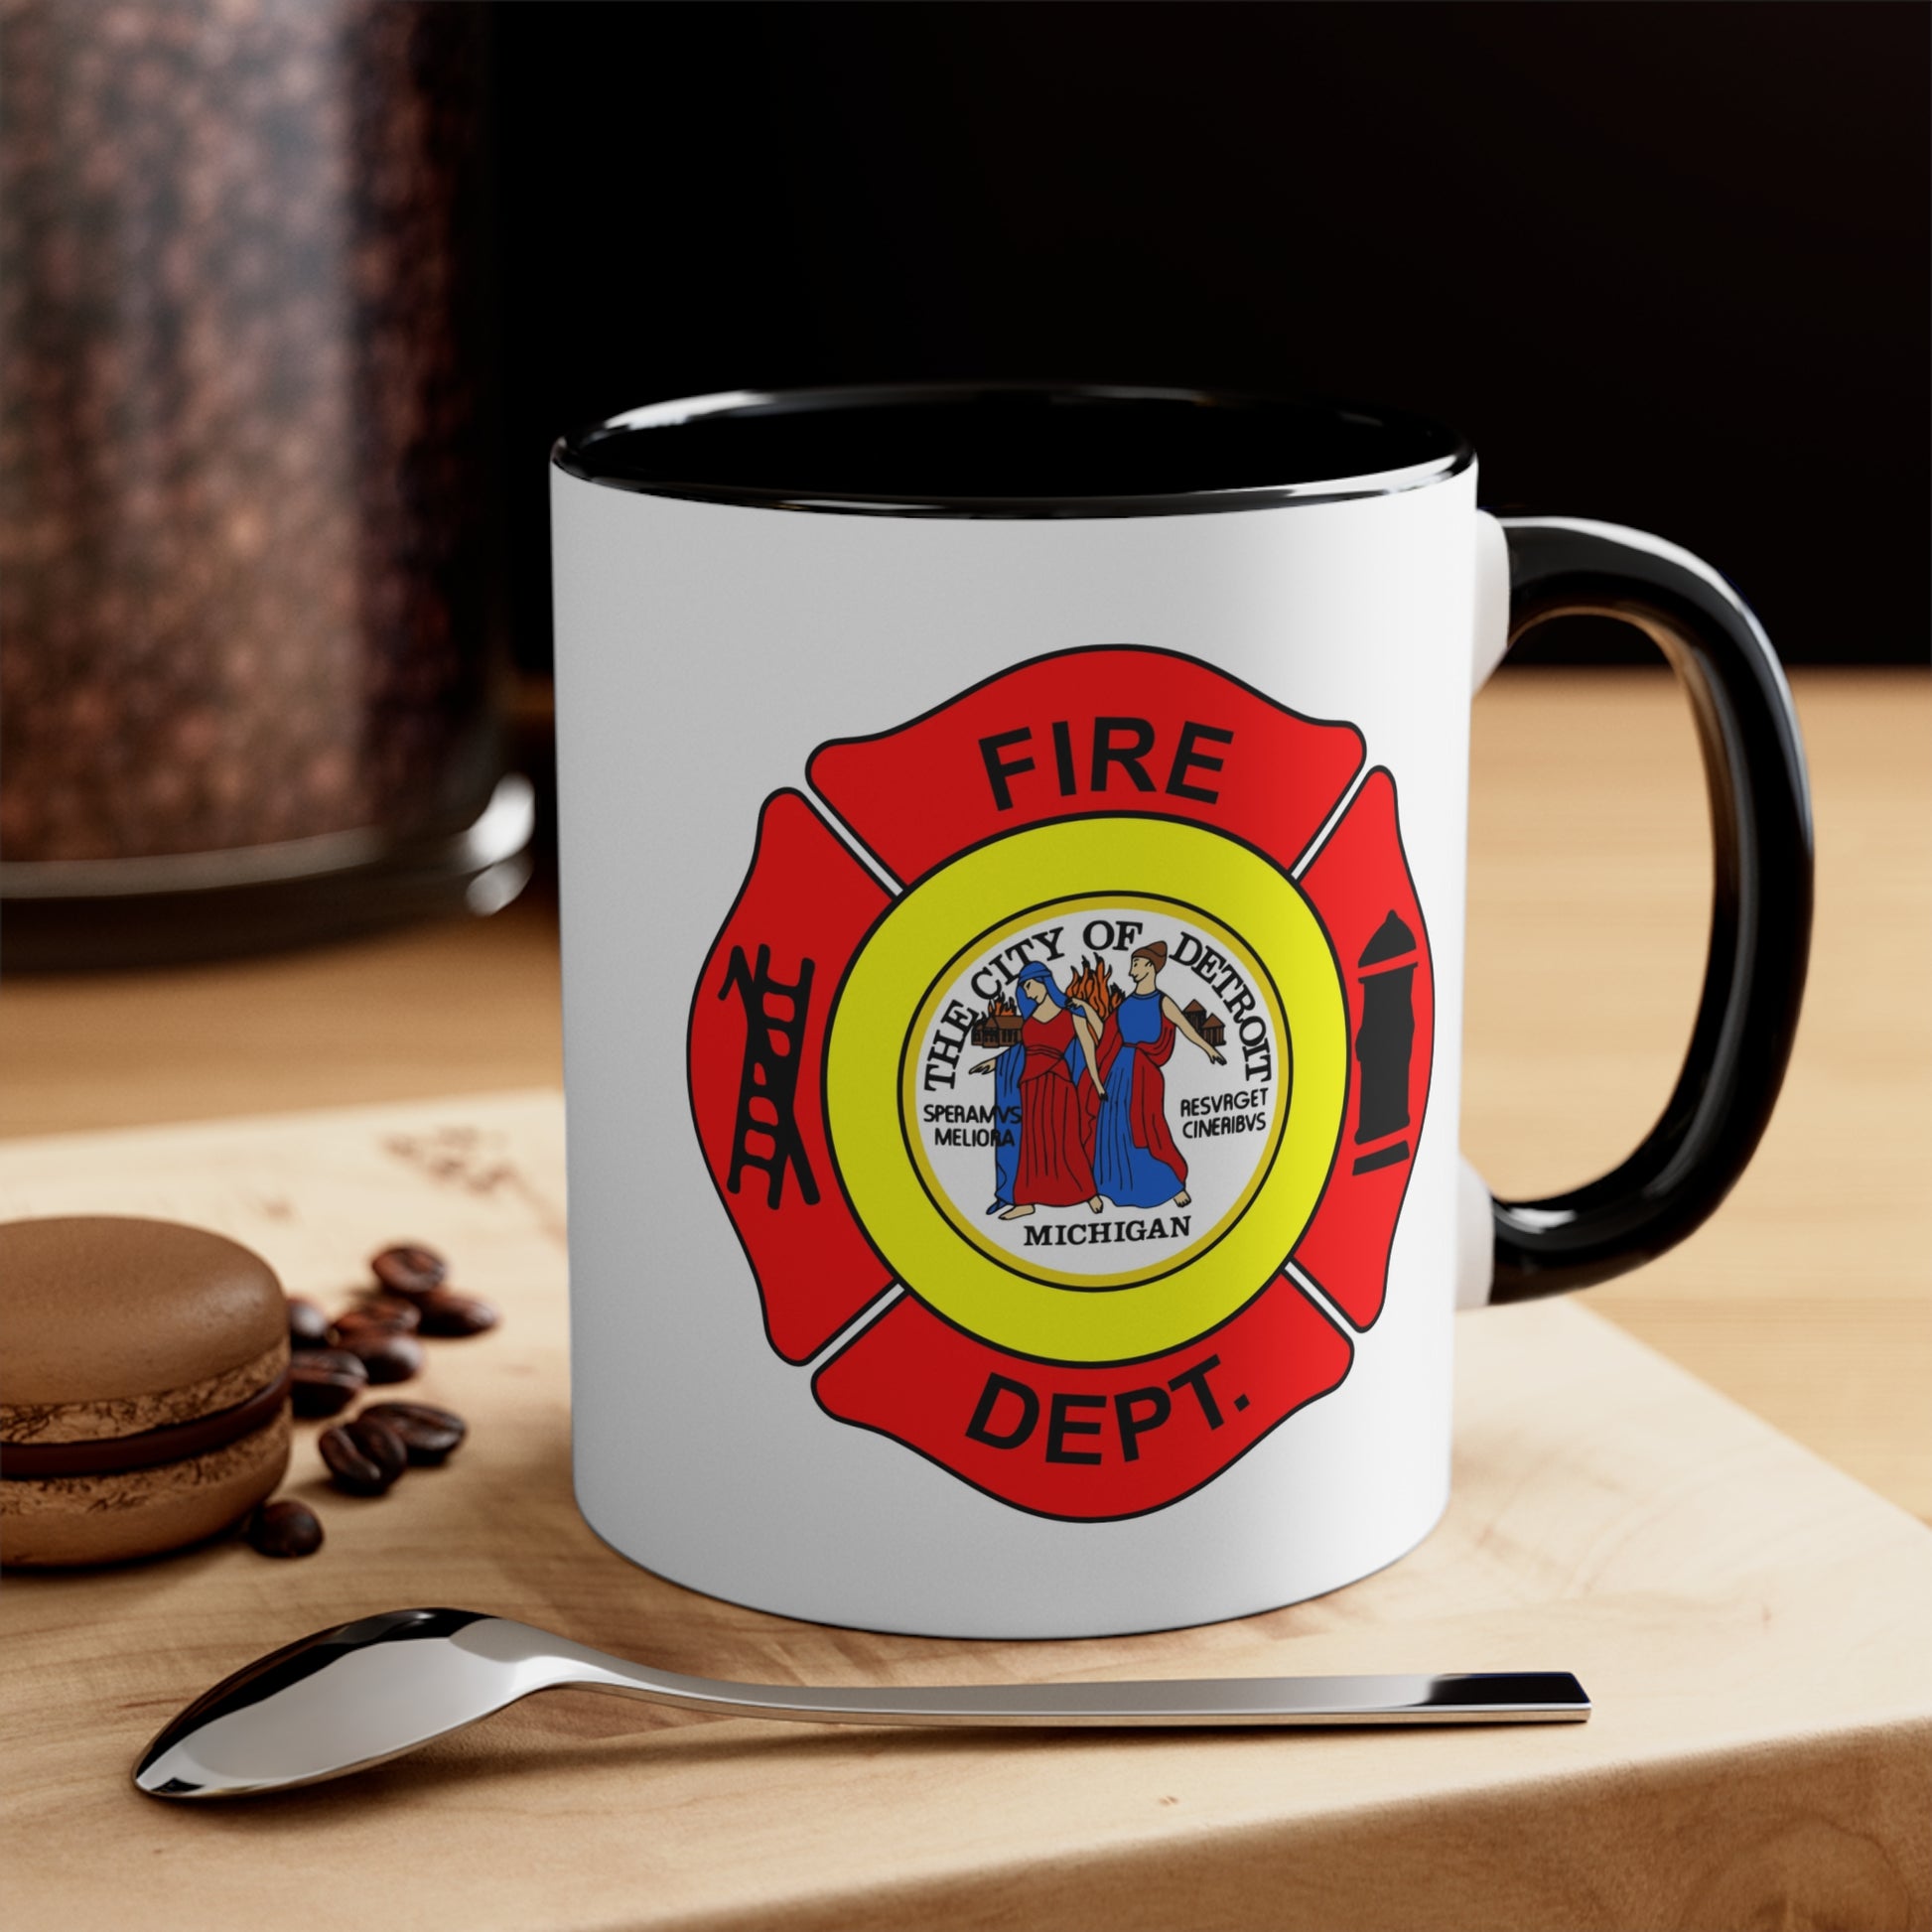 Detroit Fire Department Coffee Mug - Double Sided Black Accent White Ceramic 11oz by TheGlassyLass.com